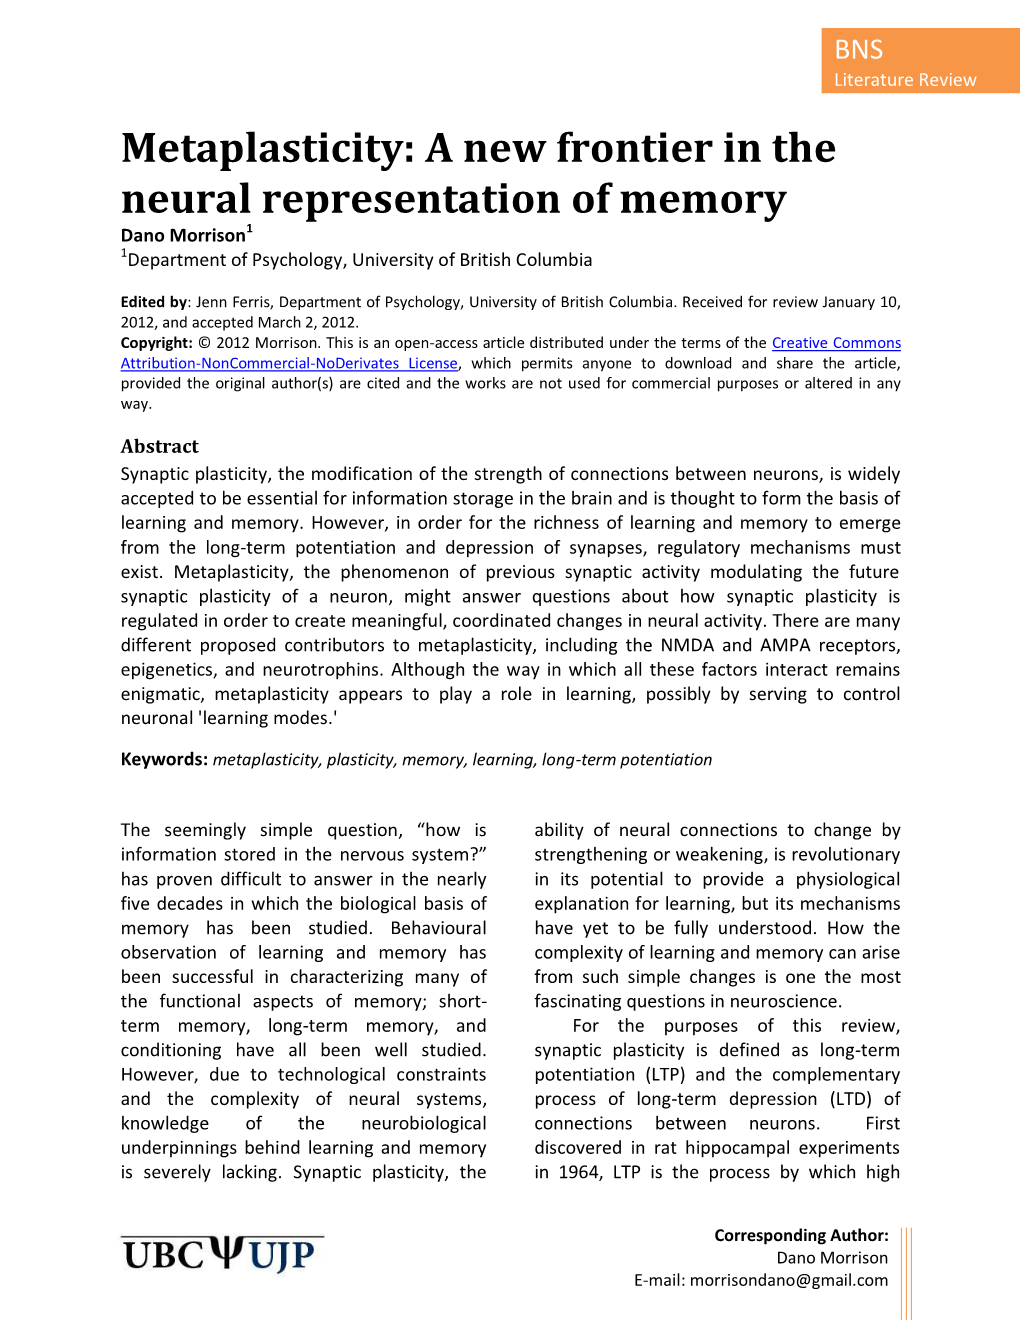 Metaplasticity: a New Frontier in the Neural Representation of Memory Dano Morrison1 1Department of Psychology, University of British Columbia